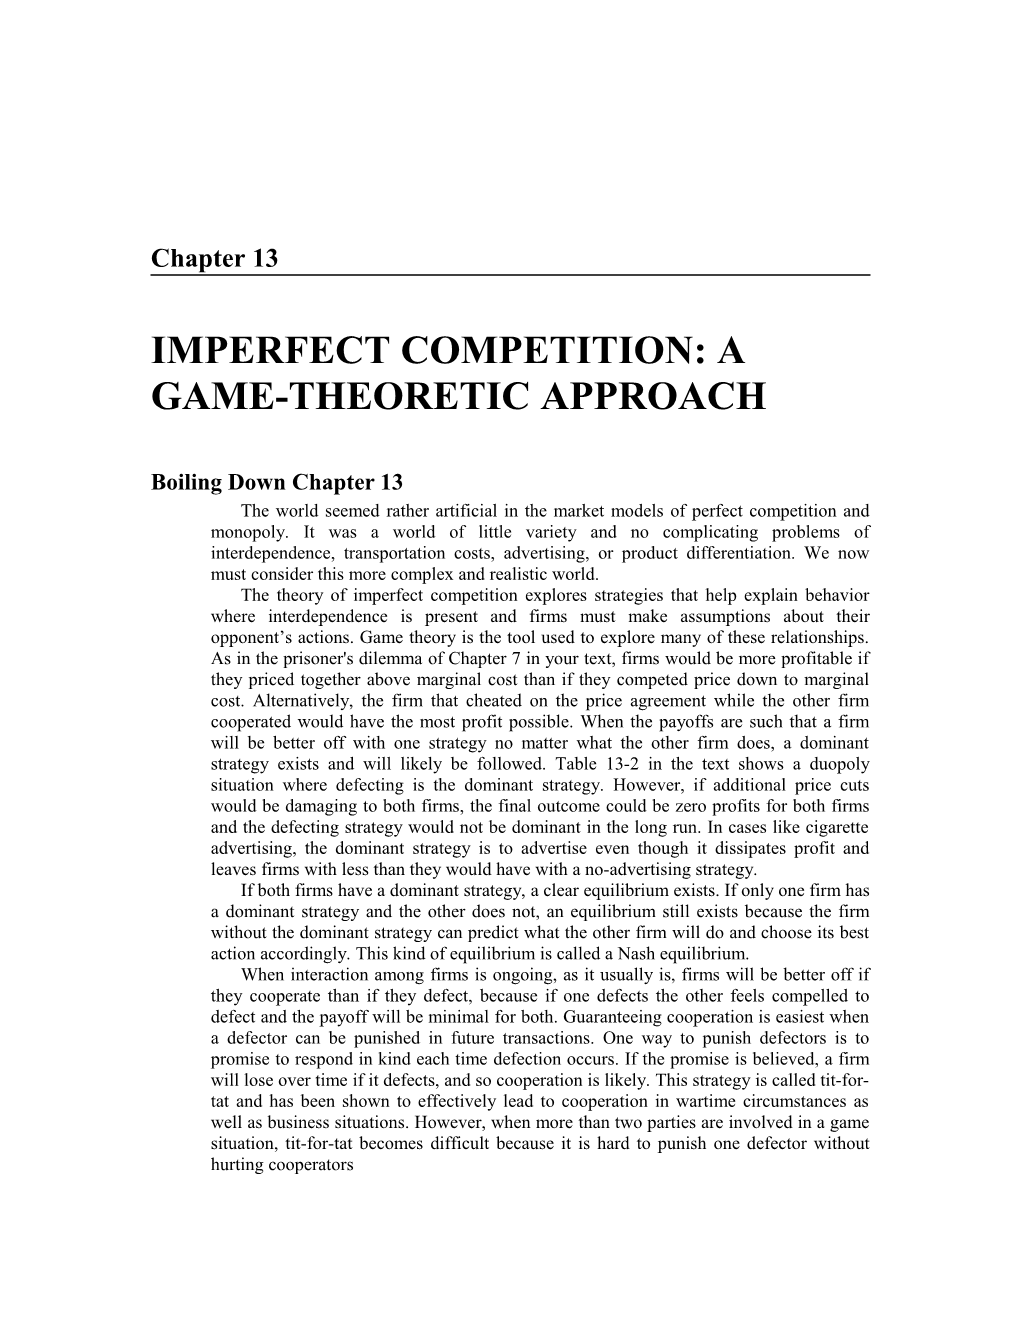 Imperfect Competition: a Game-Theoretic Approach